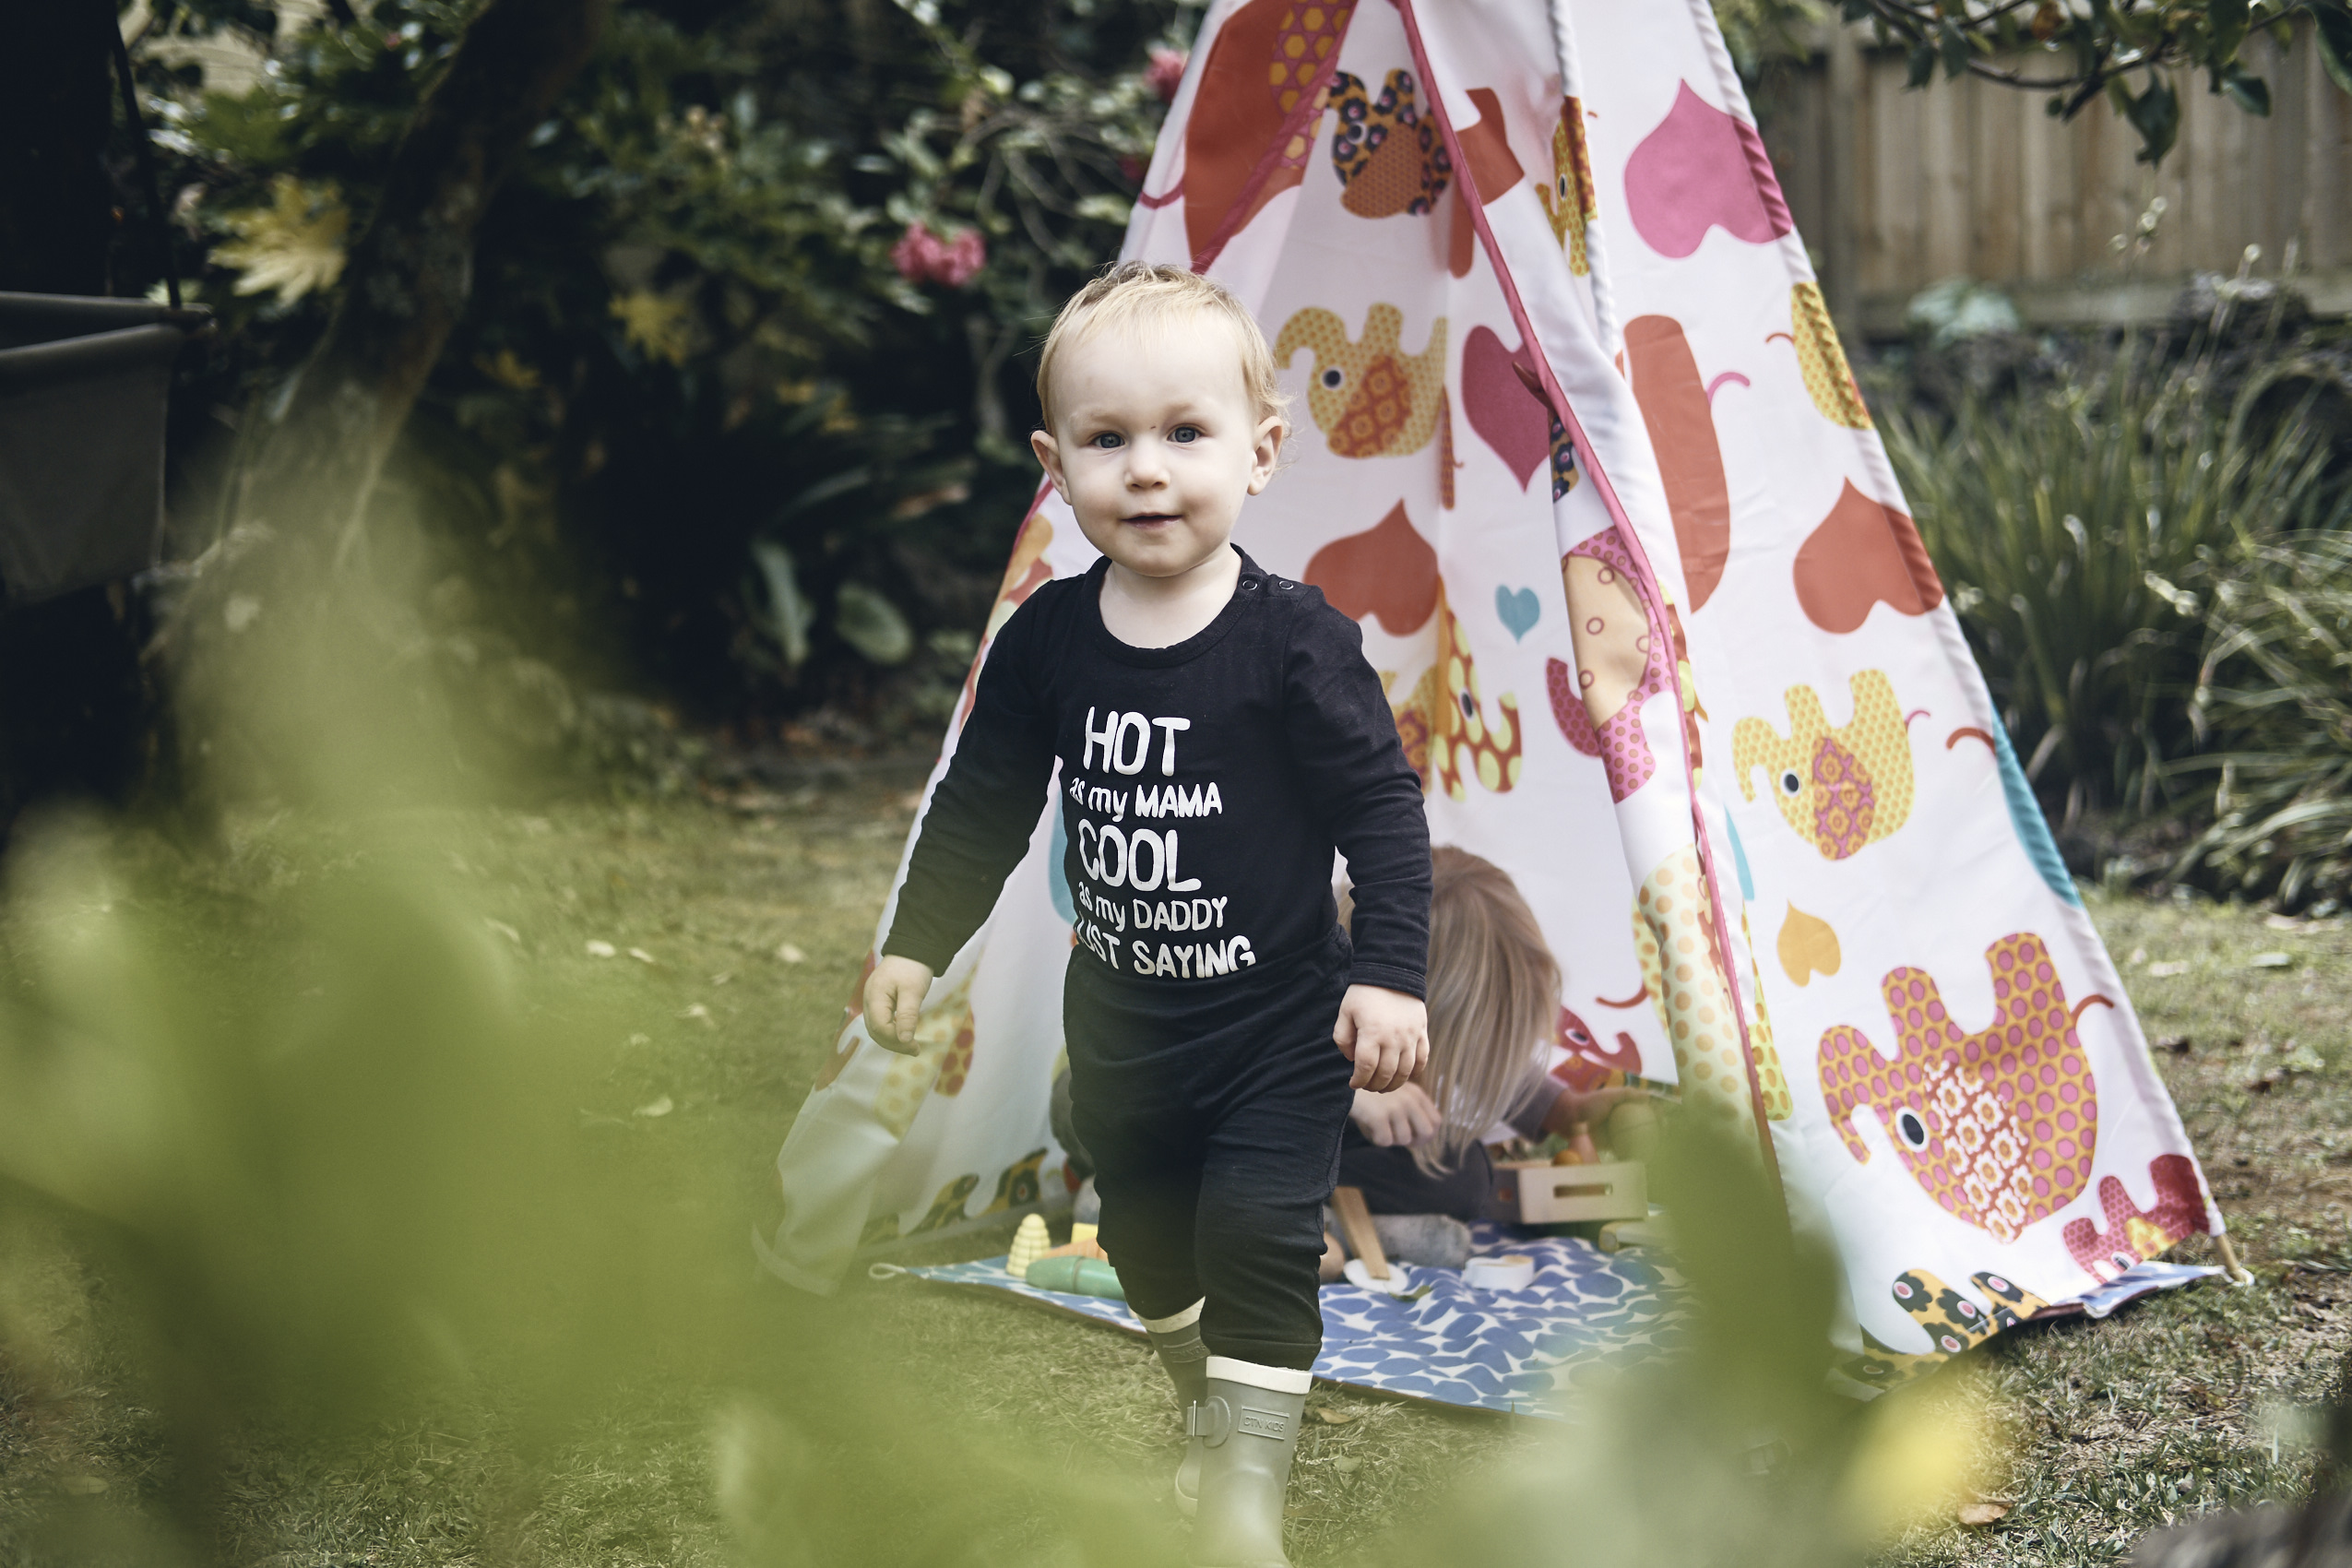 Lockdown • Brothers Playing Tent in the Garden During Pandemic • Lifestyle & Portrait Photography